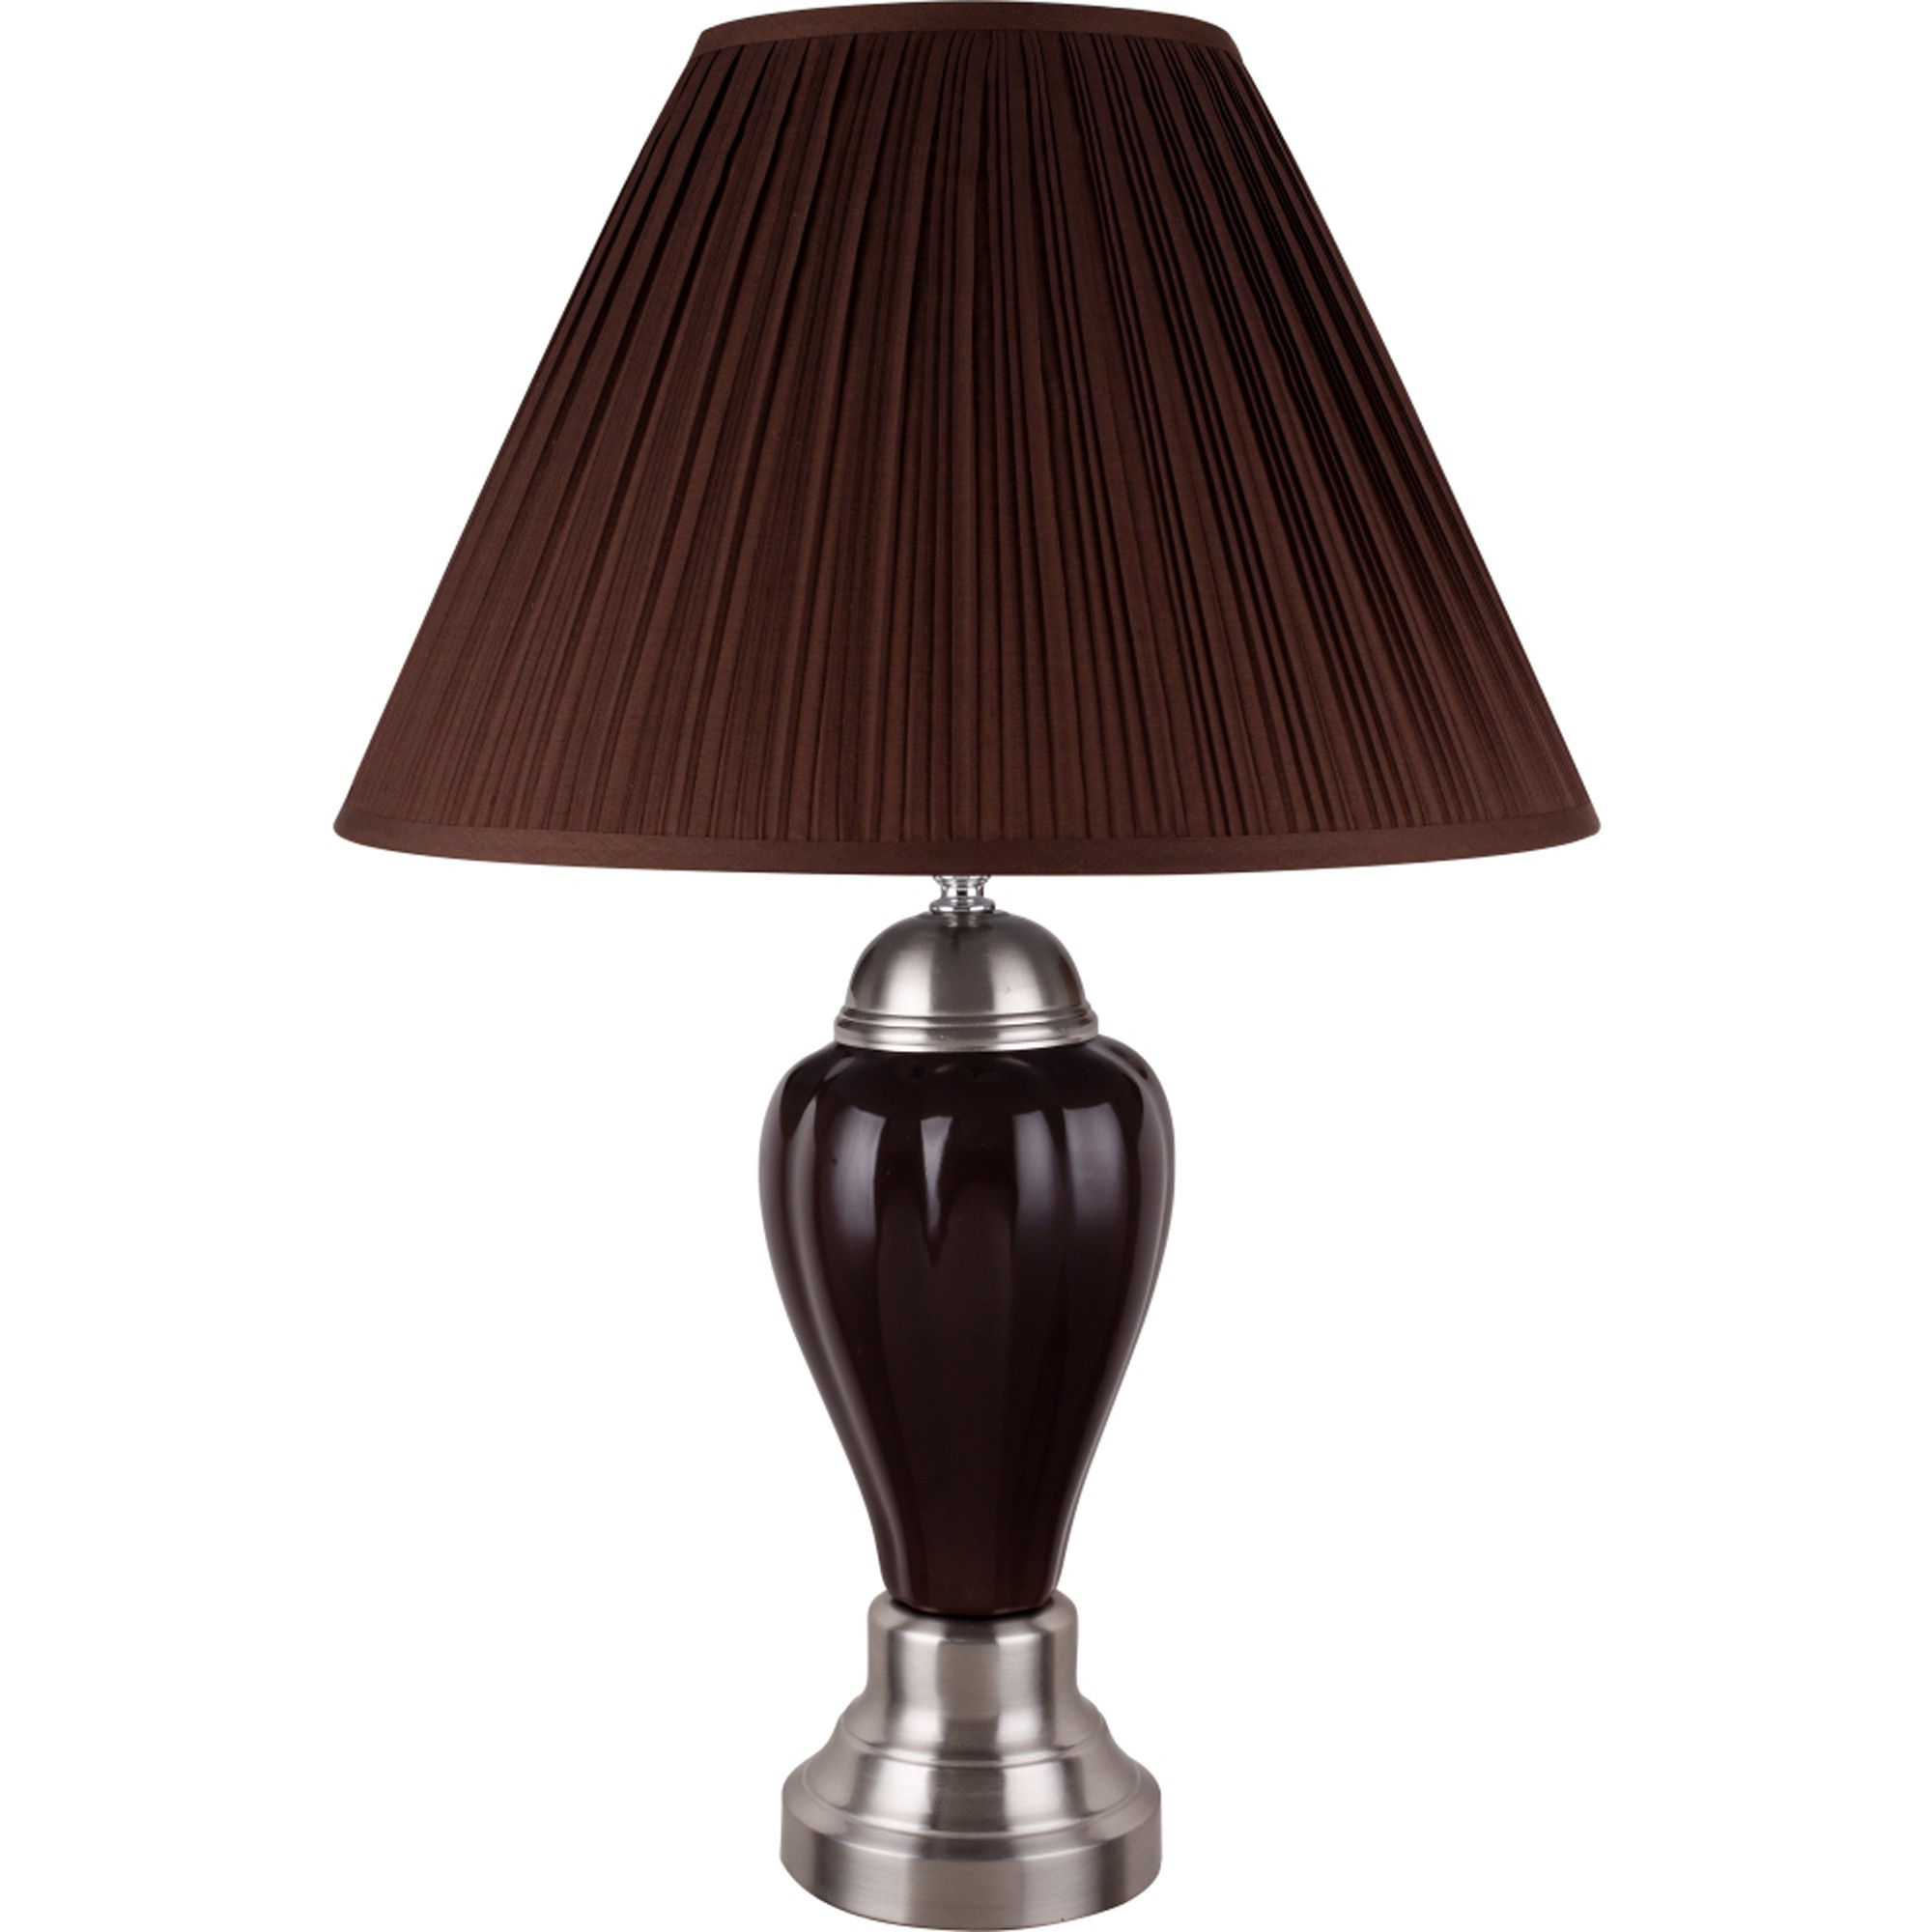 27" Brown Ceramic Bedside Table Lamp With Brown Shade-468529-1